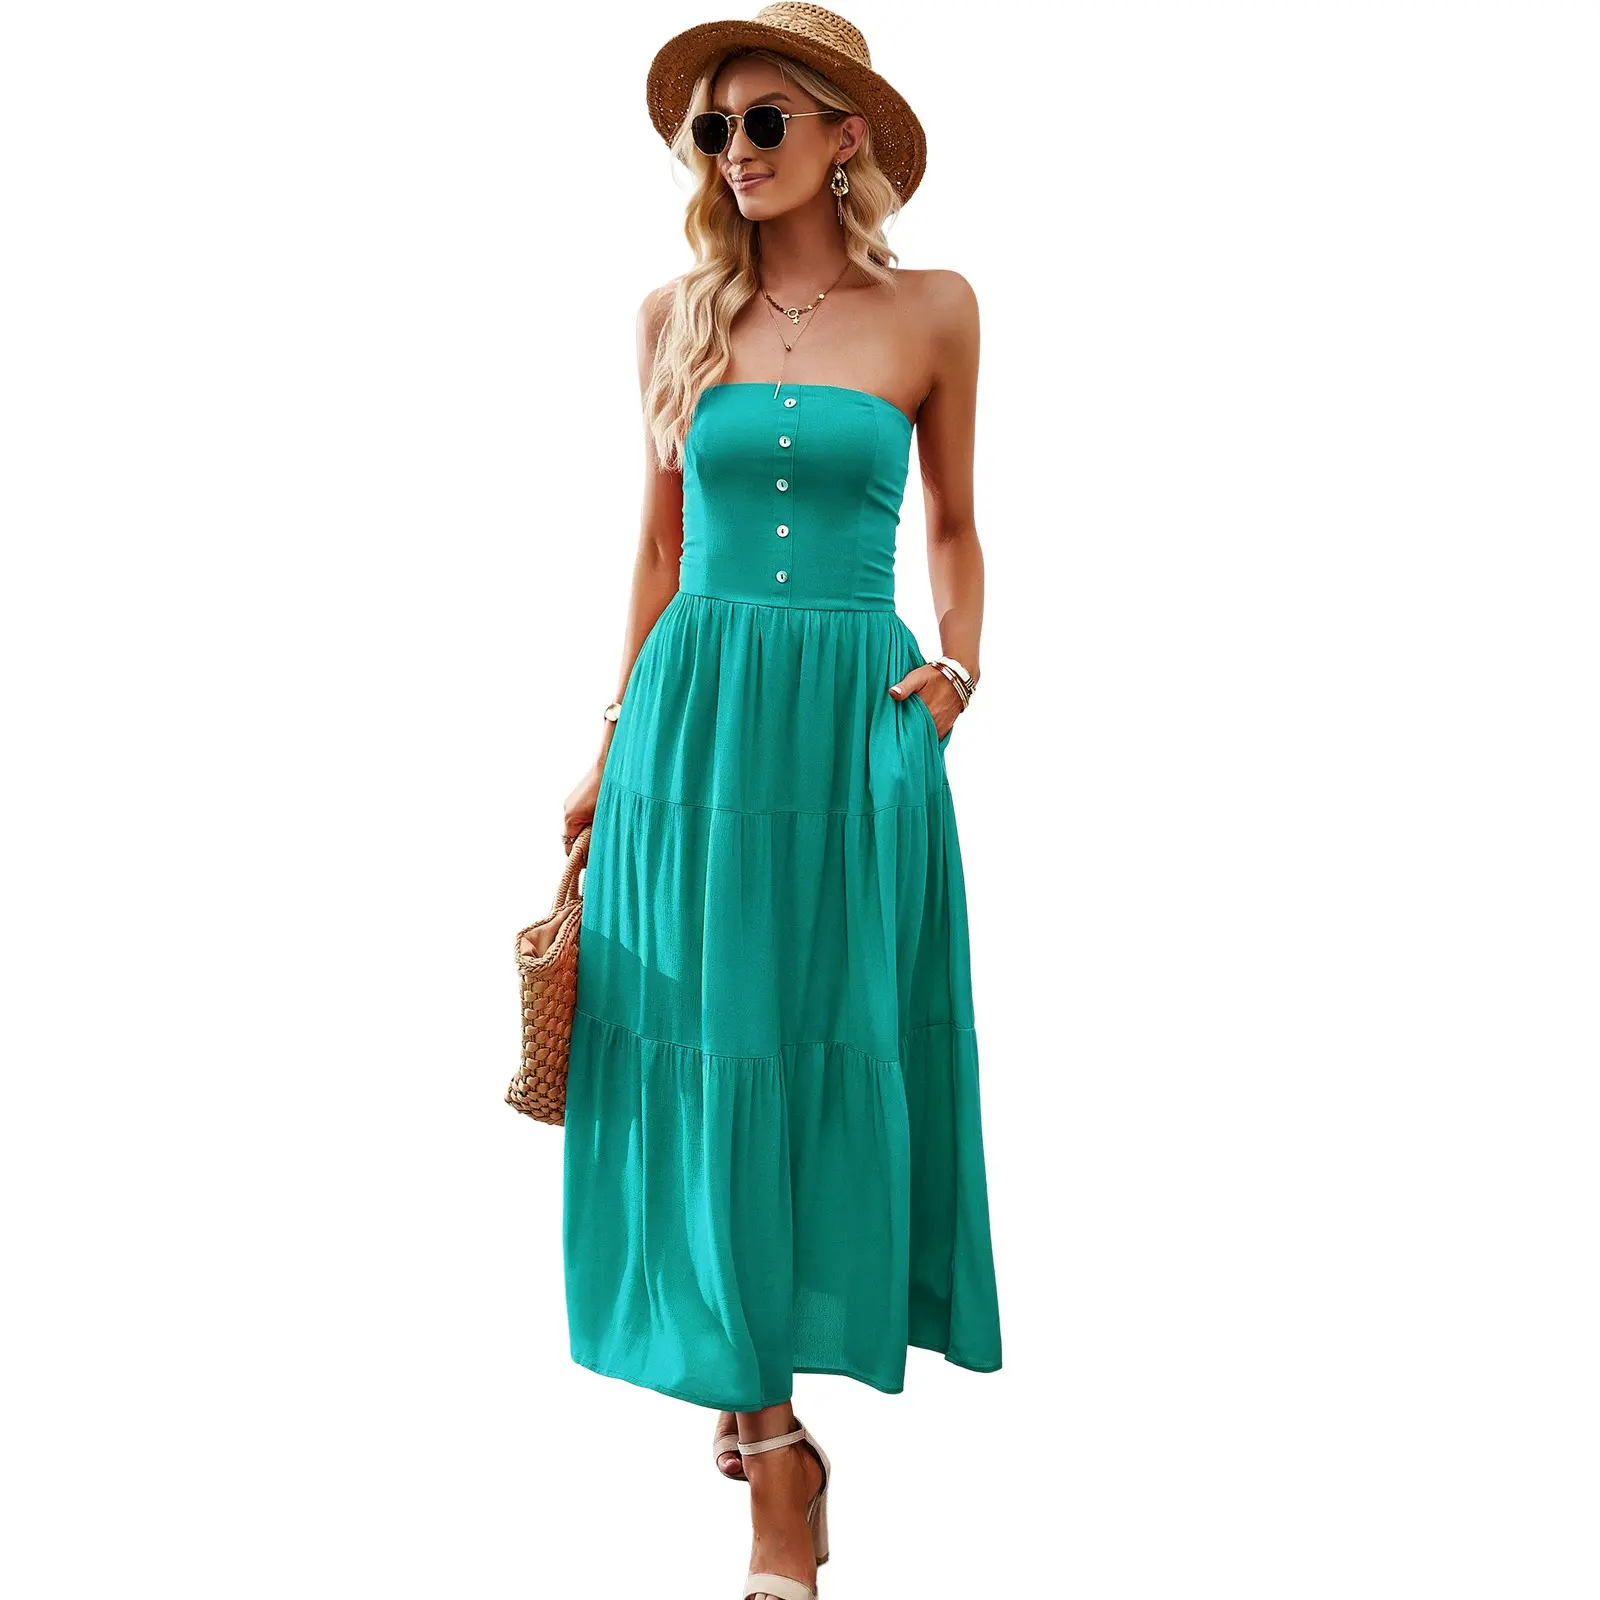 A344 Long White Casual Dresses for Women Sleeveless Cotton Summer Beach Dress A Line Spaghetti Strap Sundresses with Pockets